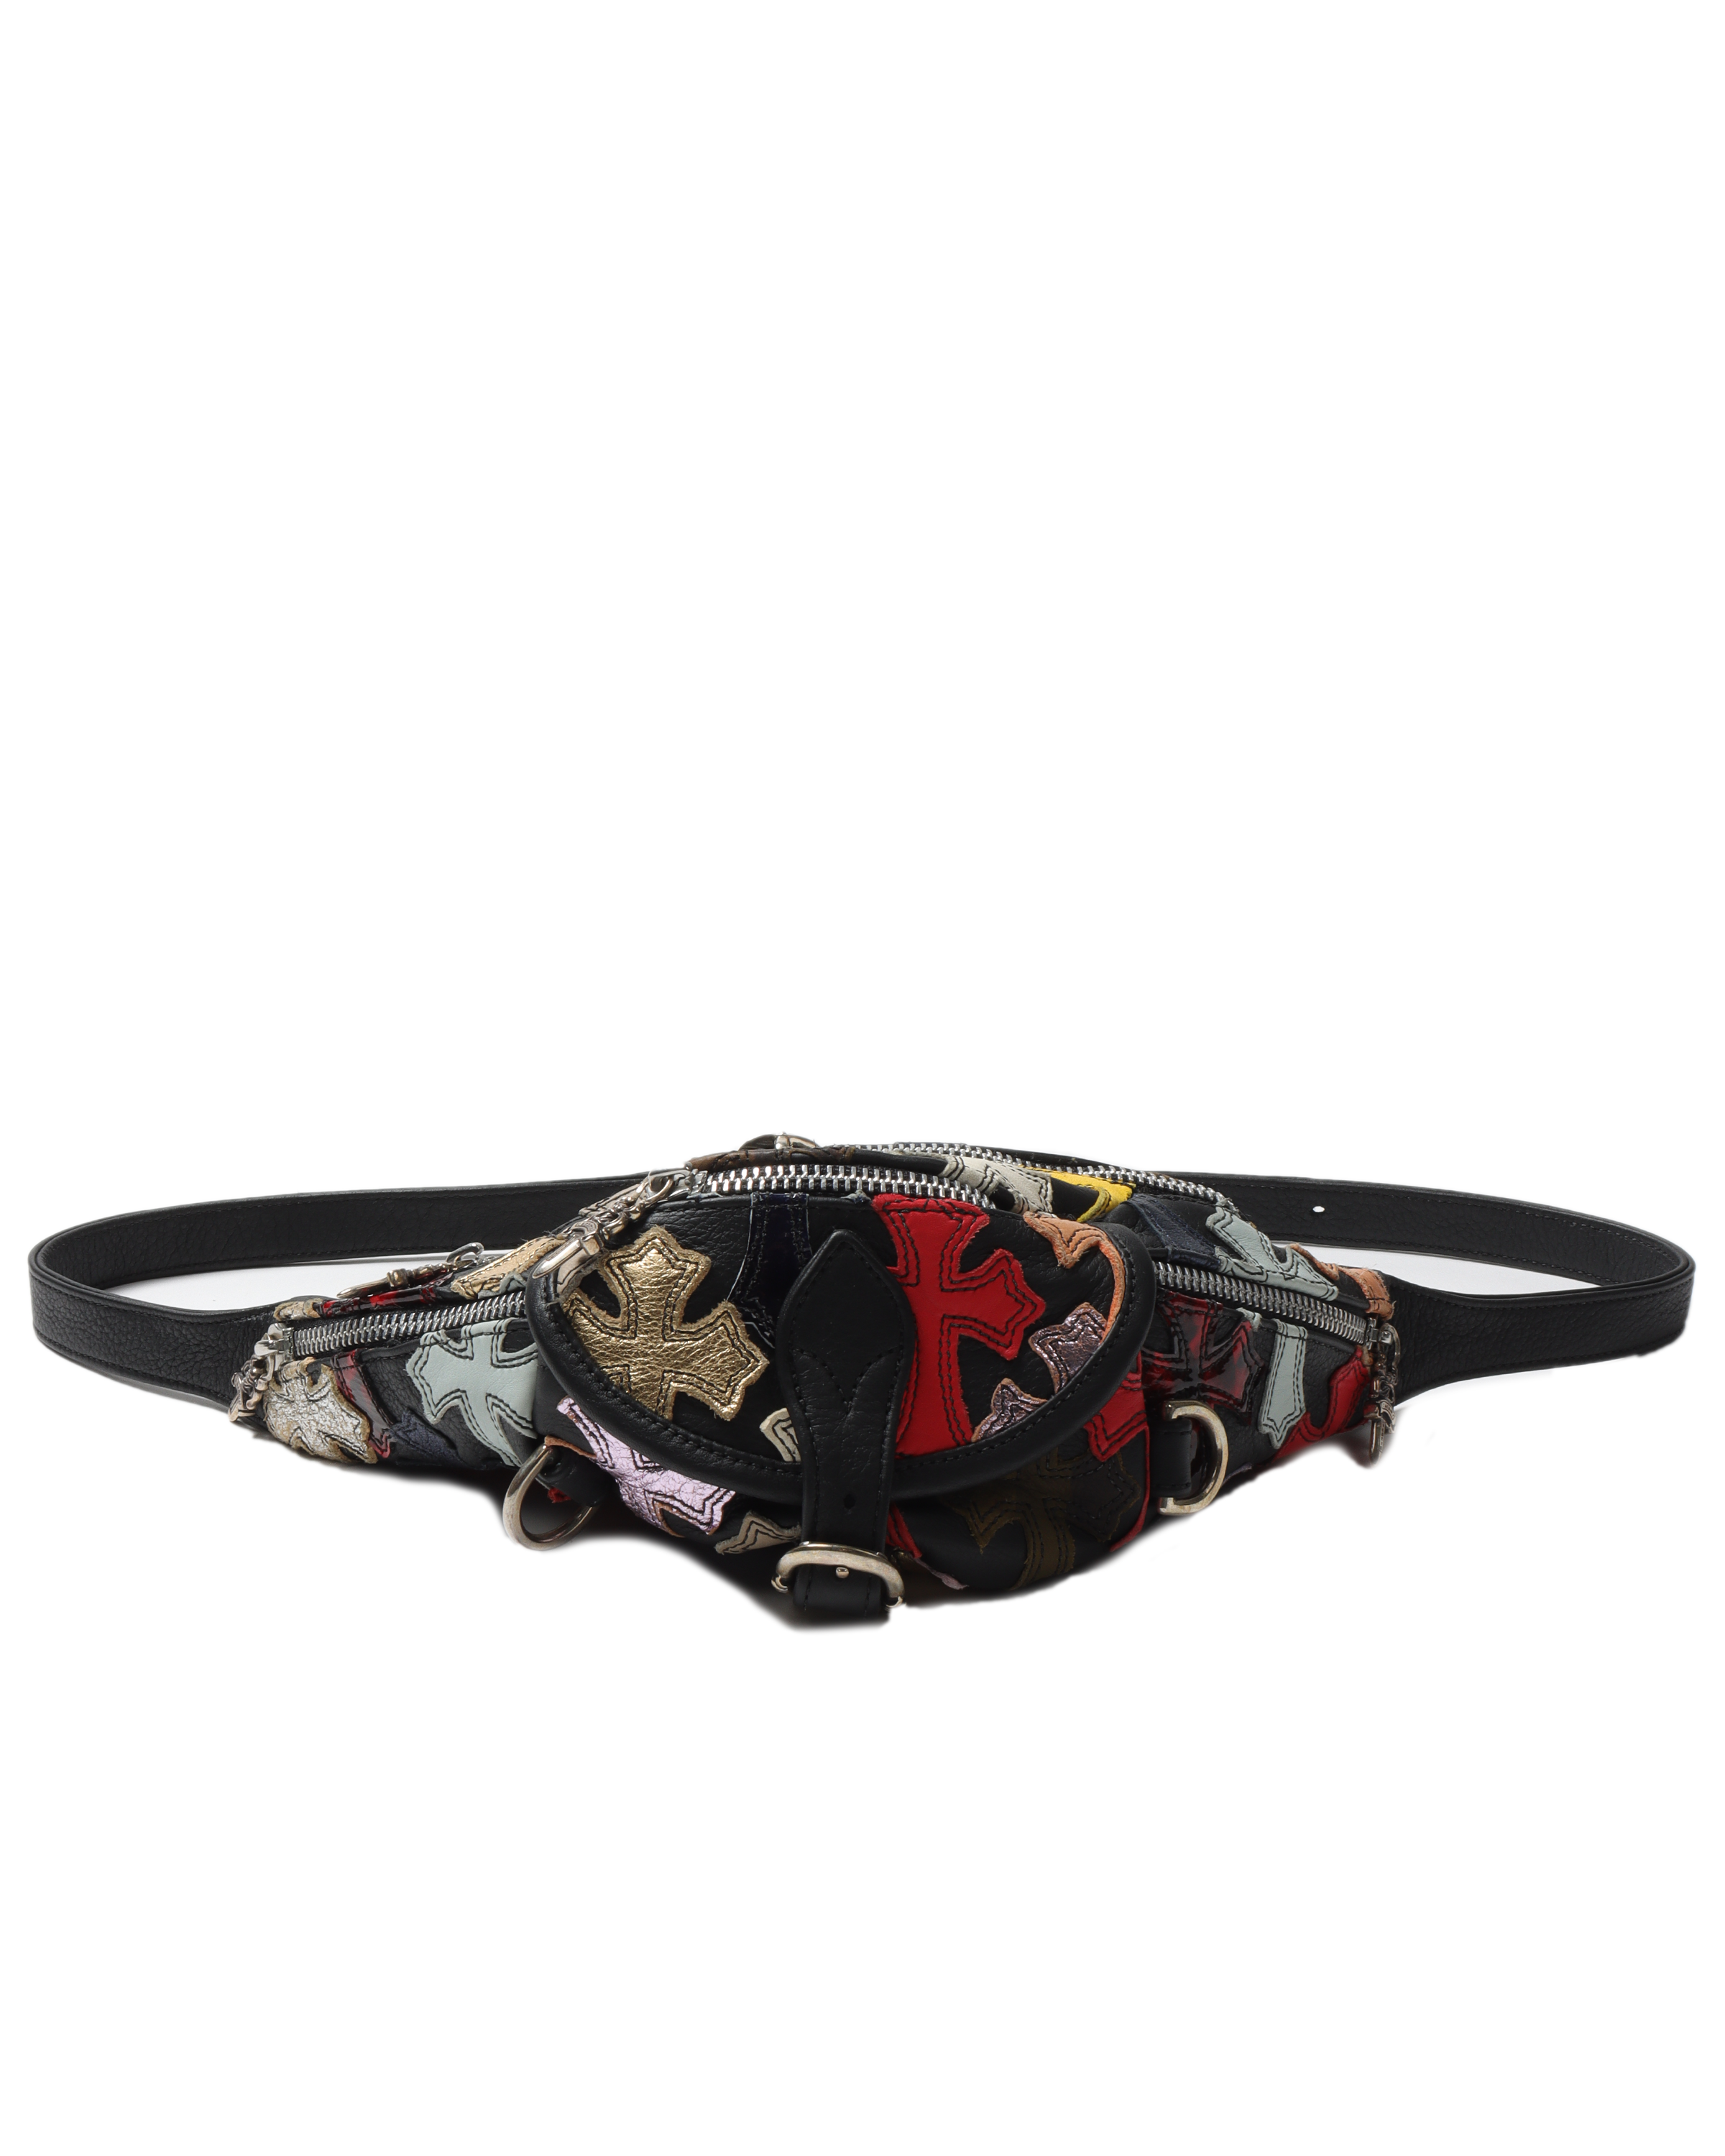 Chrome Hearts All-Over Cross Patch Leather Waist Bag